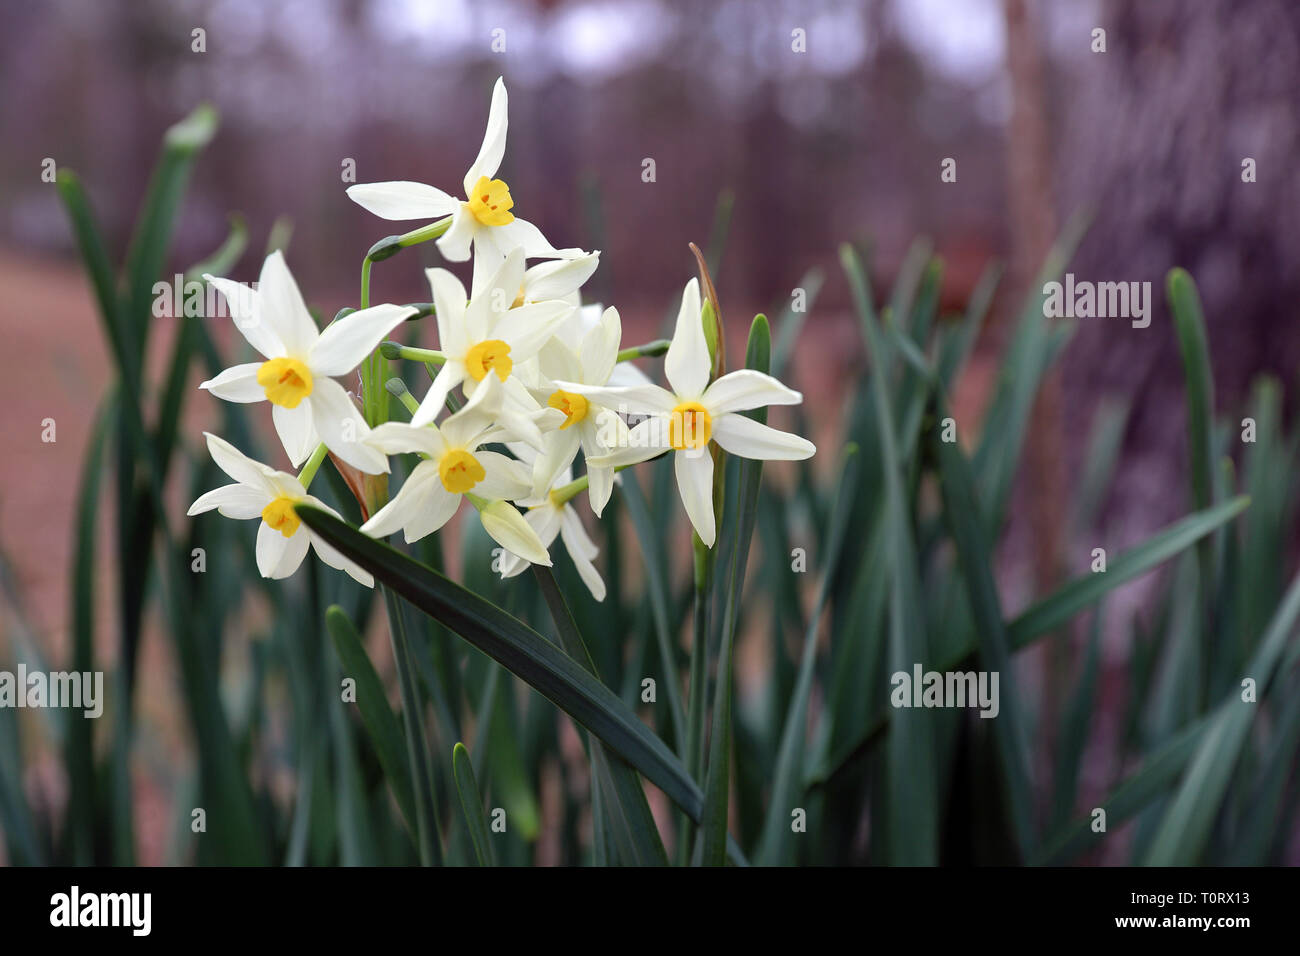 White Narcissus flowers in bloom in the outdoors Stock Photo